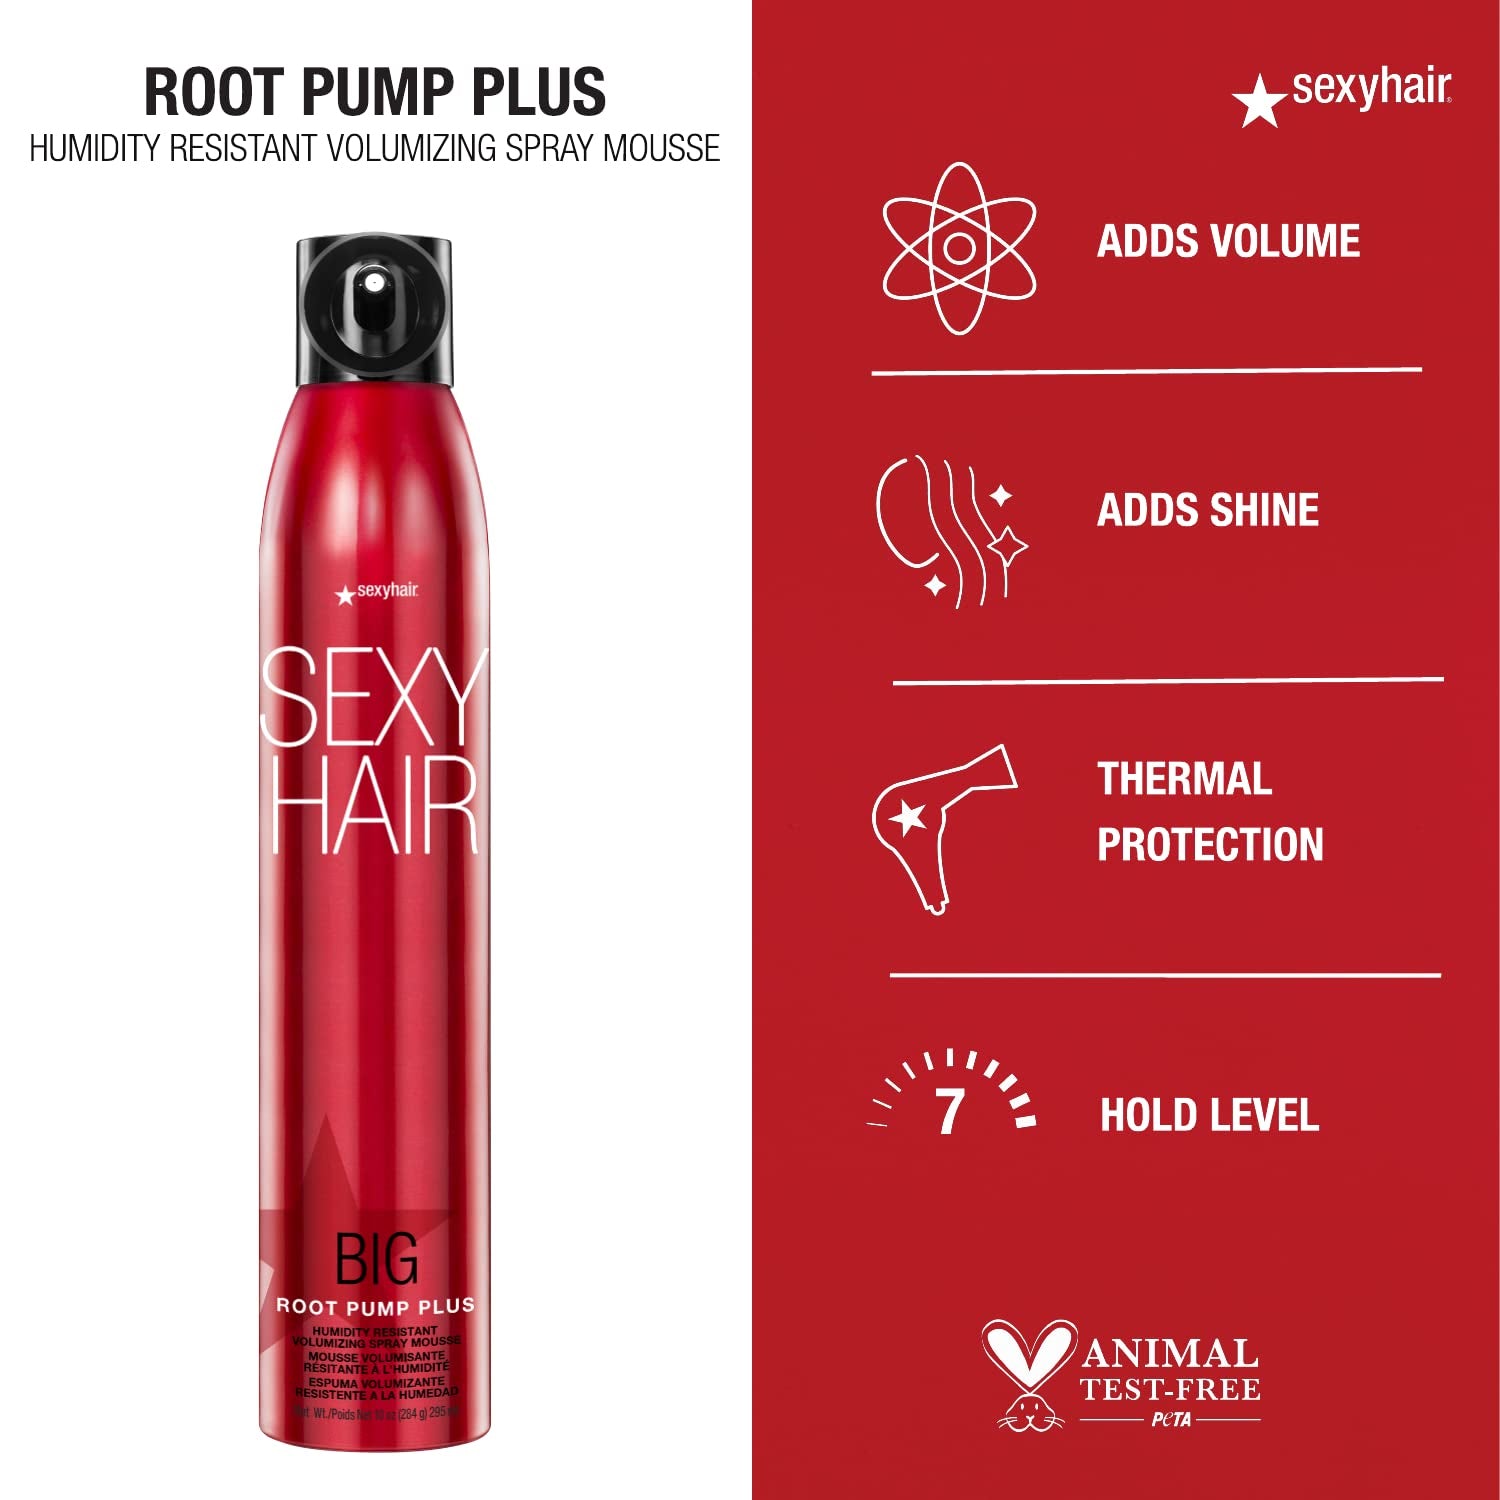 Big Sexy Hair Root Pump Plus Humidity Resistant Volumizing Spray Mousse Benefits